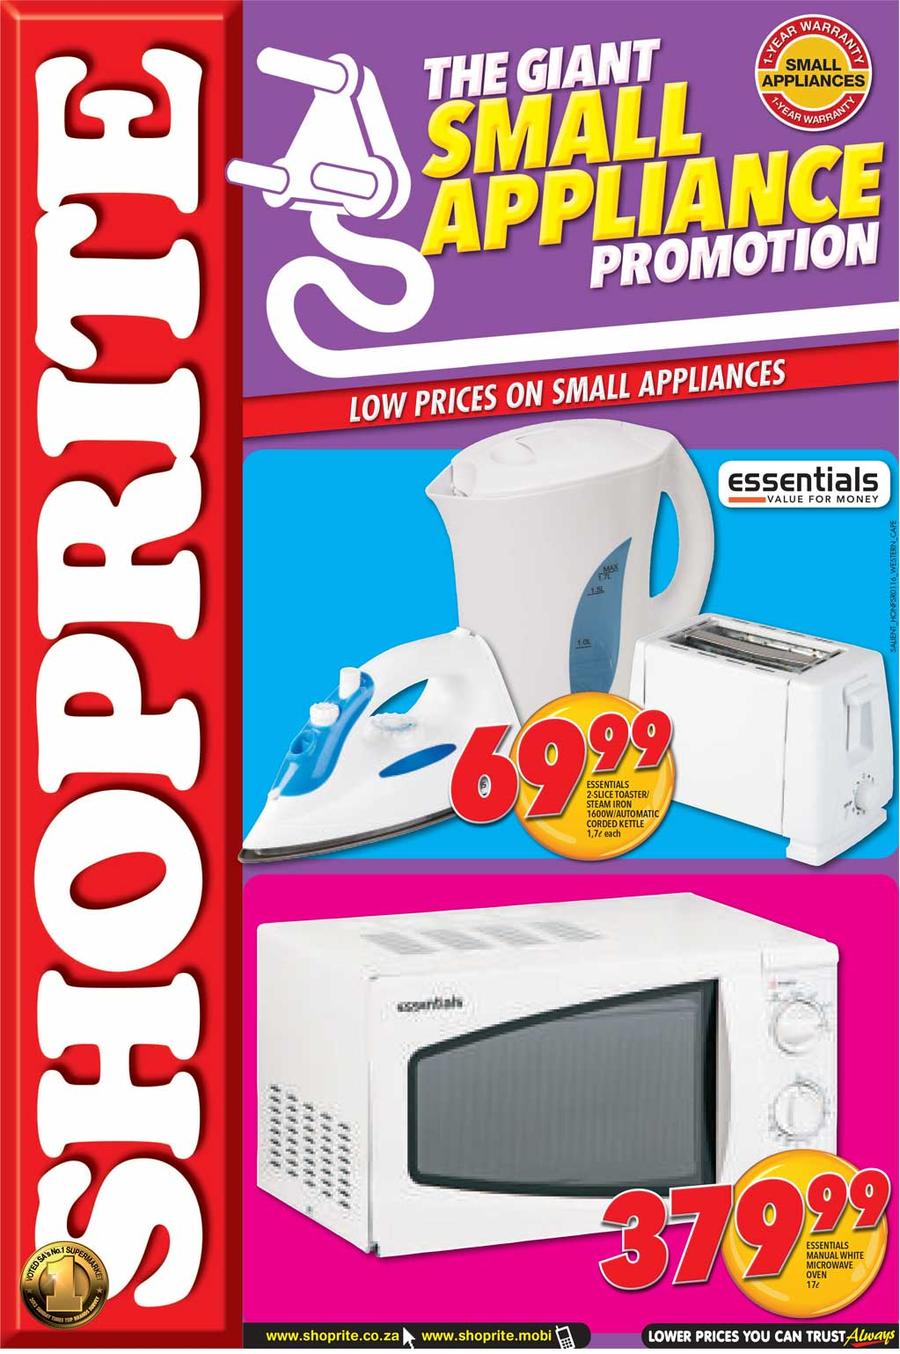 Shoprite Western Cape The Giant Small Appliance Promotion 20 Aug 2 Sep Www Guzzle Co Za